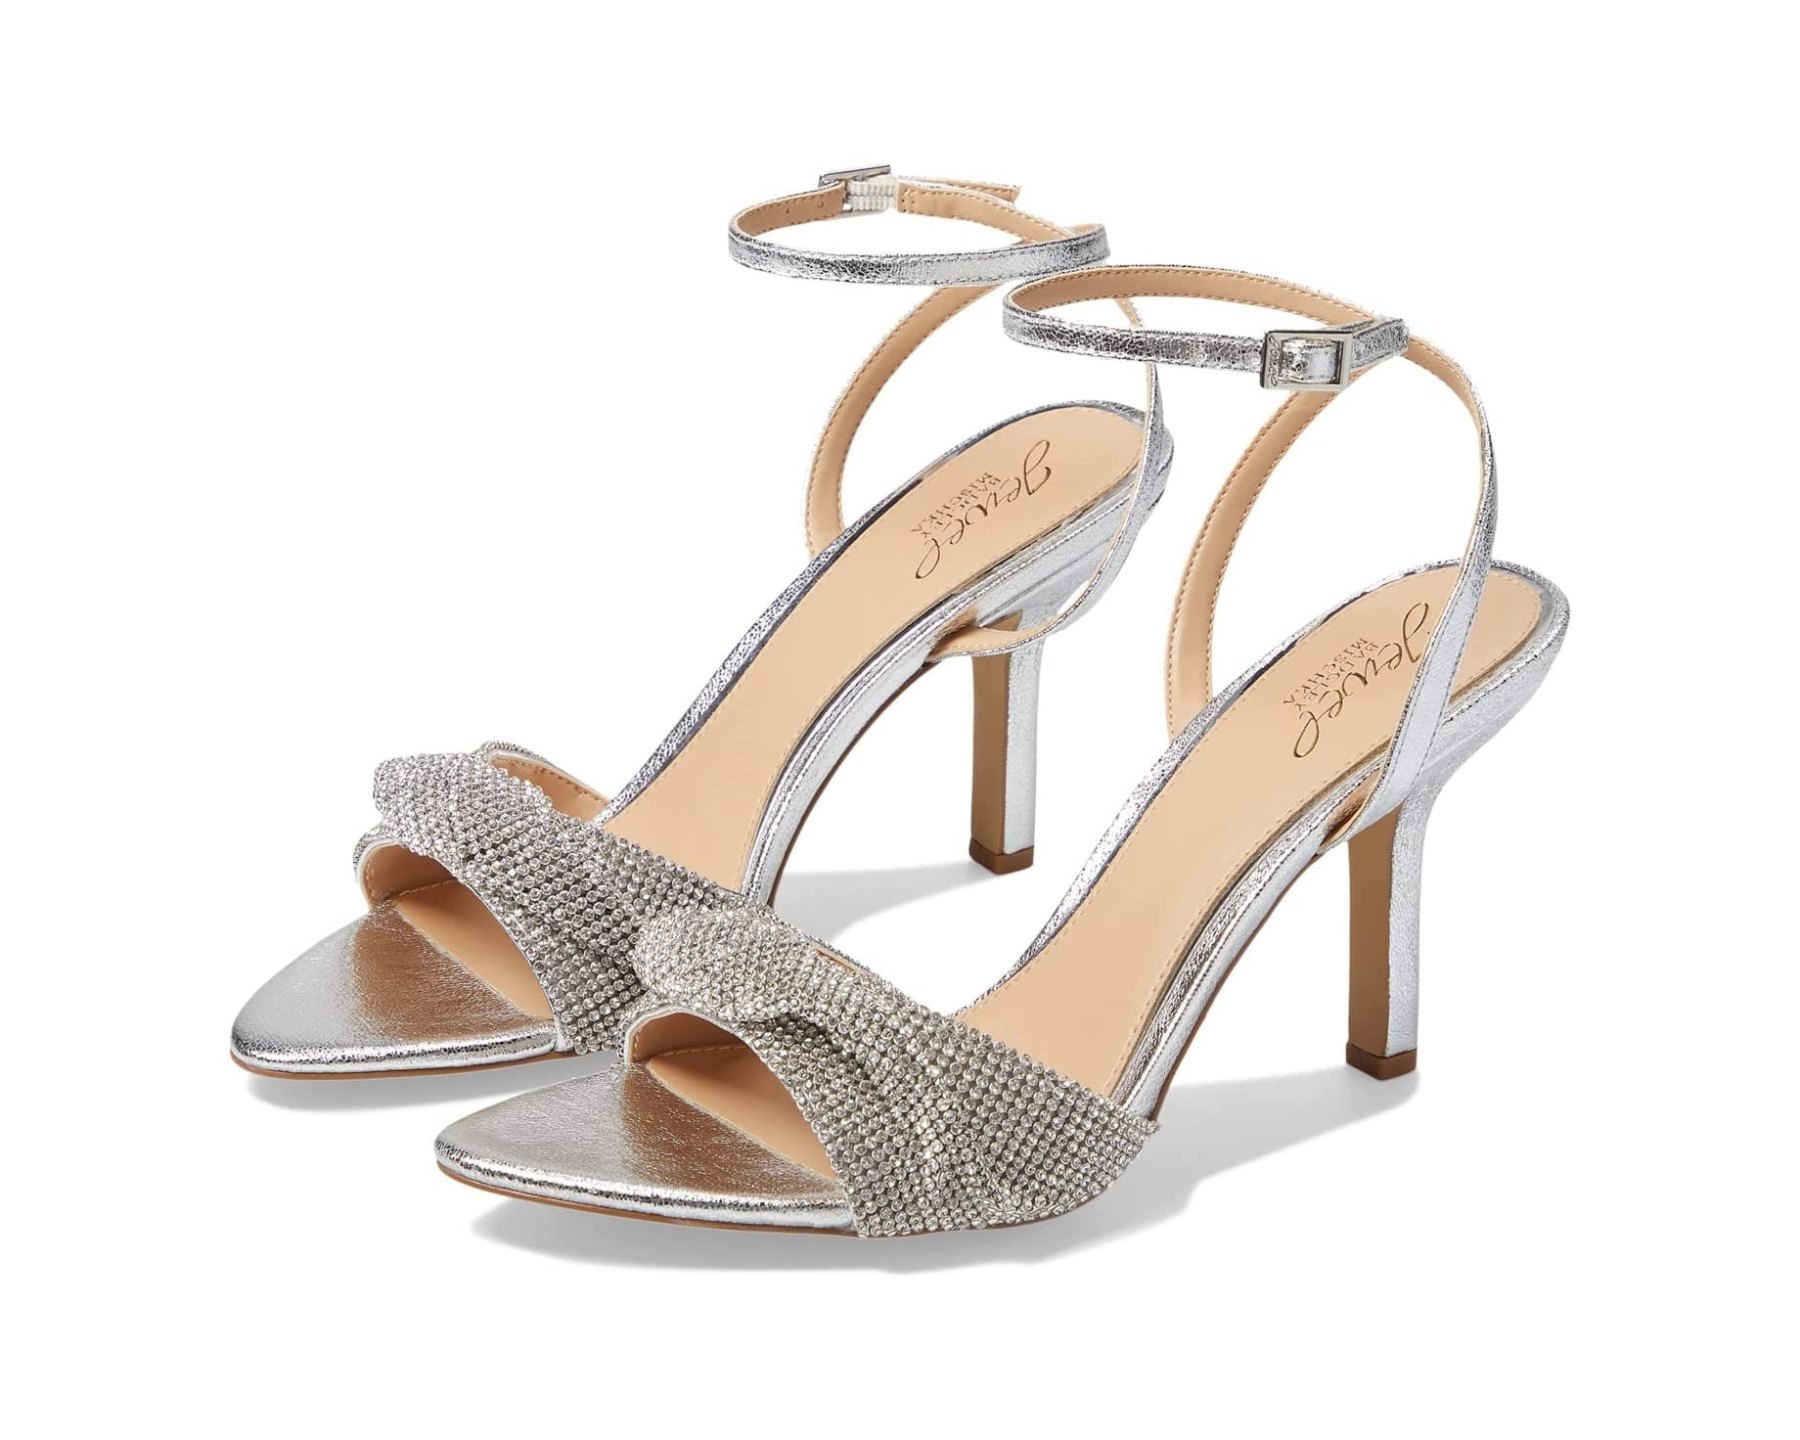 Shop These 9 Sparkly Shoes for New Year's Eve — Up to 50% Off! | Us Weekly